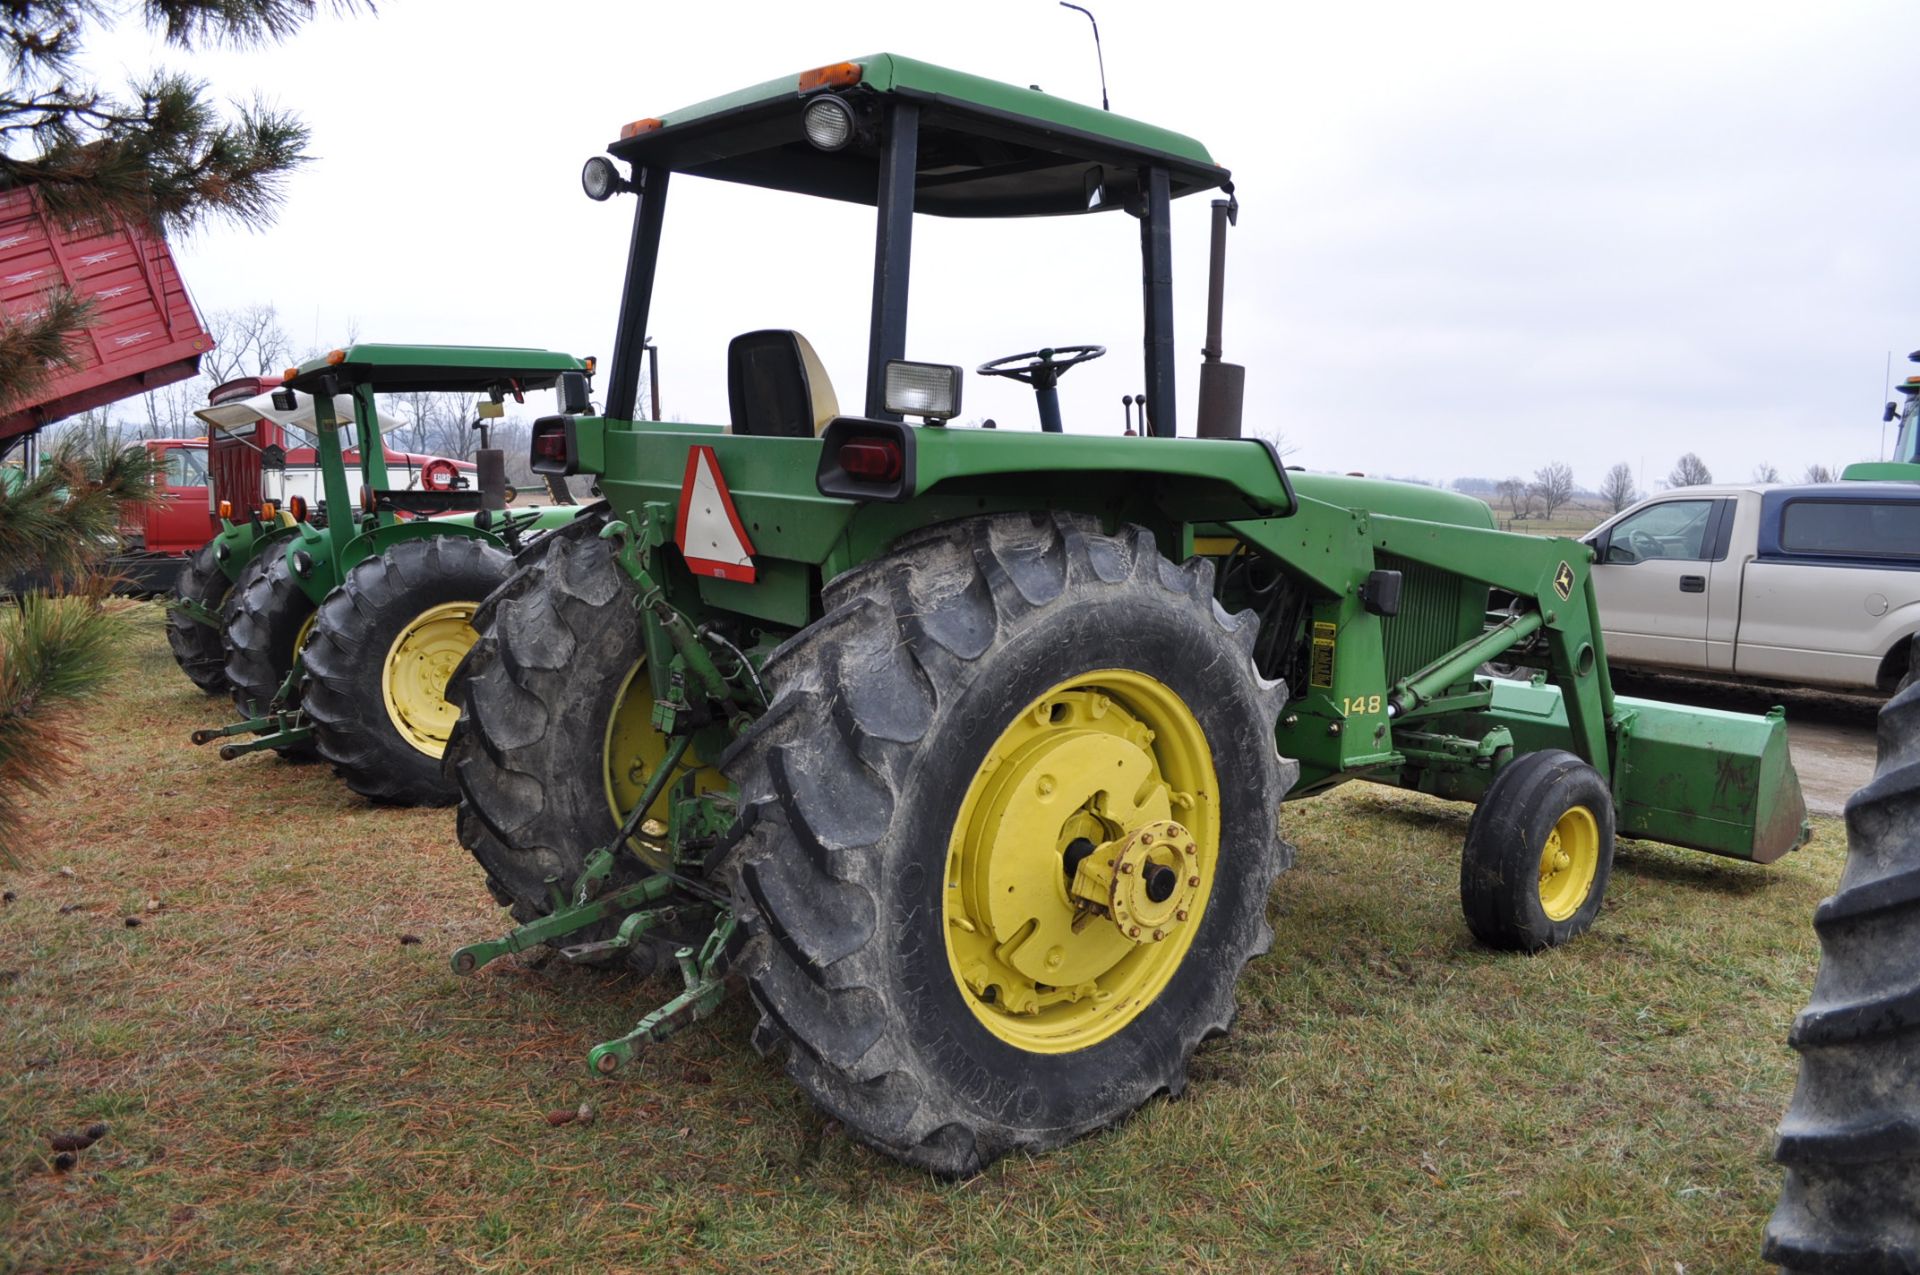 John Deere 4030 tractor, diesel, 18.4-34 rear duals, rear wts, 9.5-15 front, 4-post canopy, Syncro, - Image 3 of 26